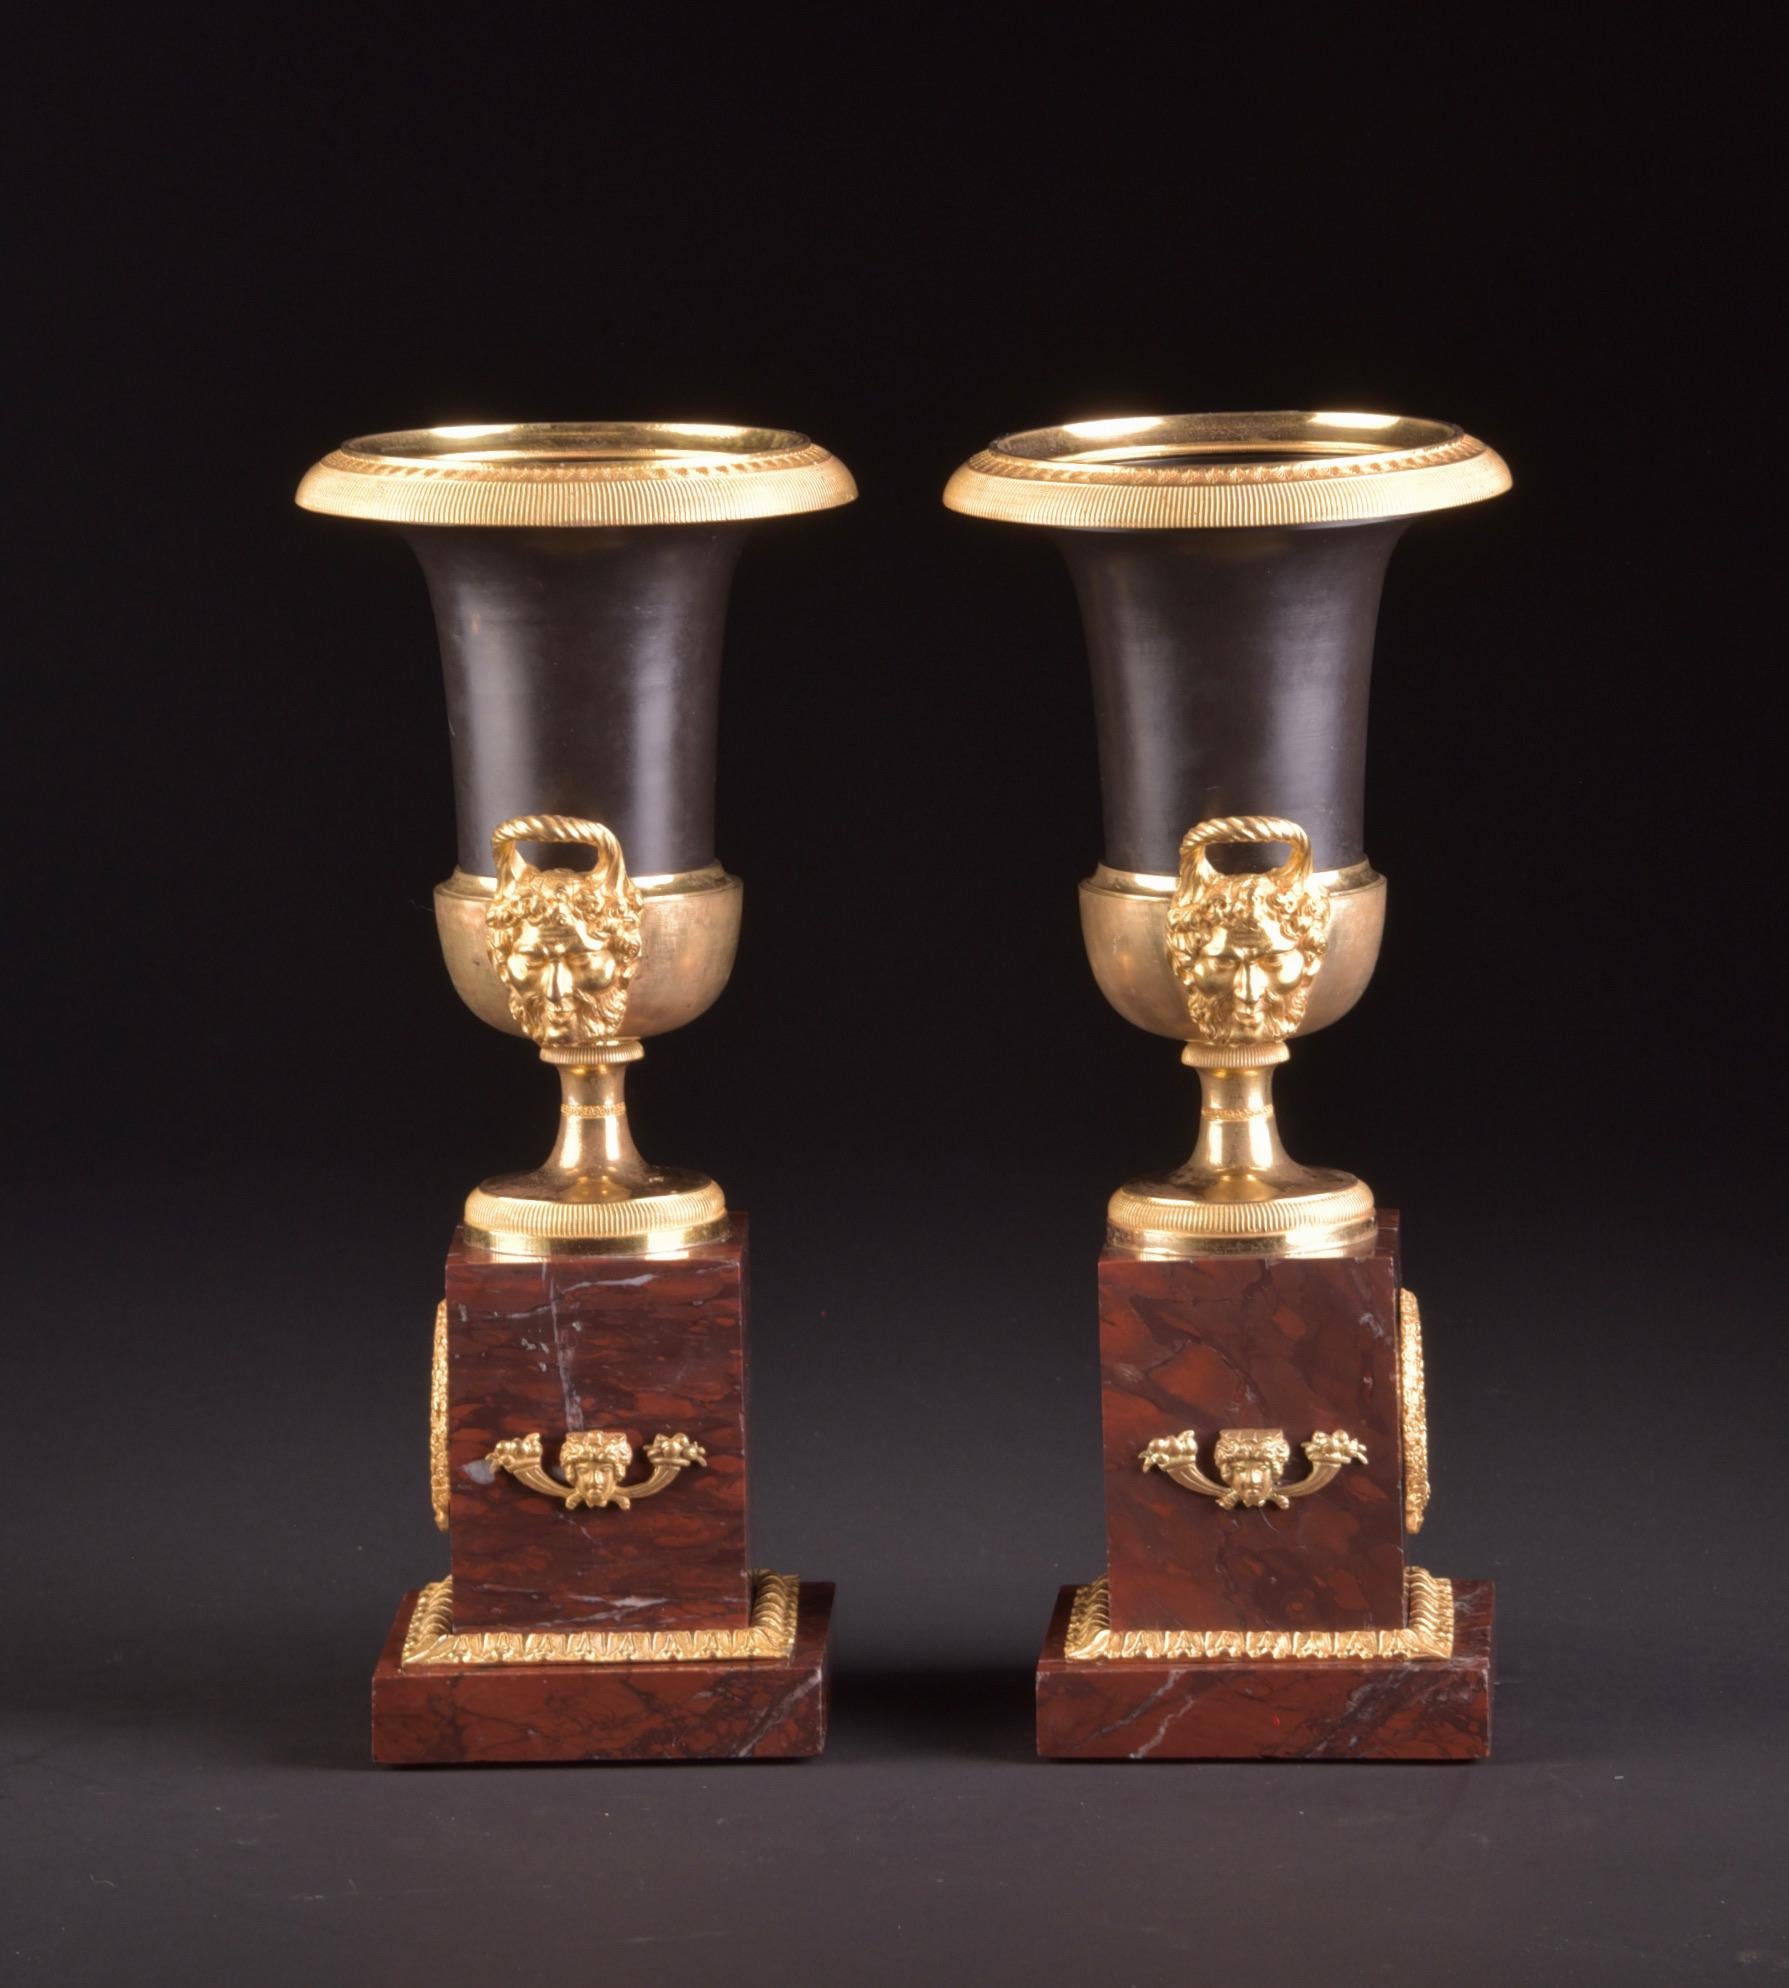 Antique French bronze and marble cassolettes or Medici vases, with gilt and patinated bronze on marble base.
The vases are 33 x 15 x 15 cm, and weights 4,4 kg each.
  